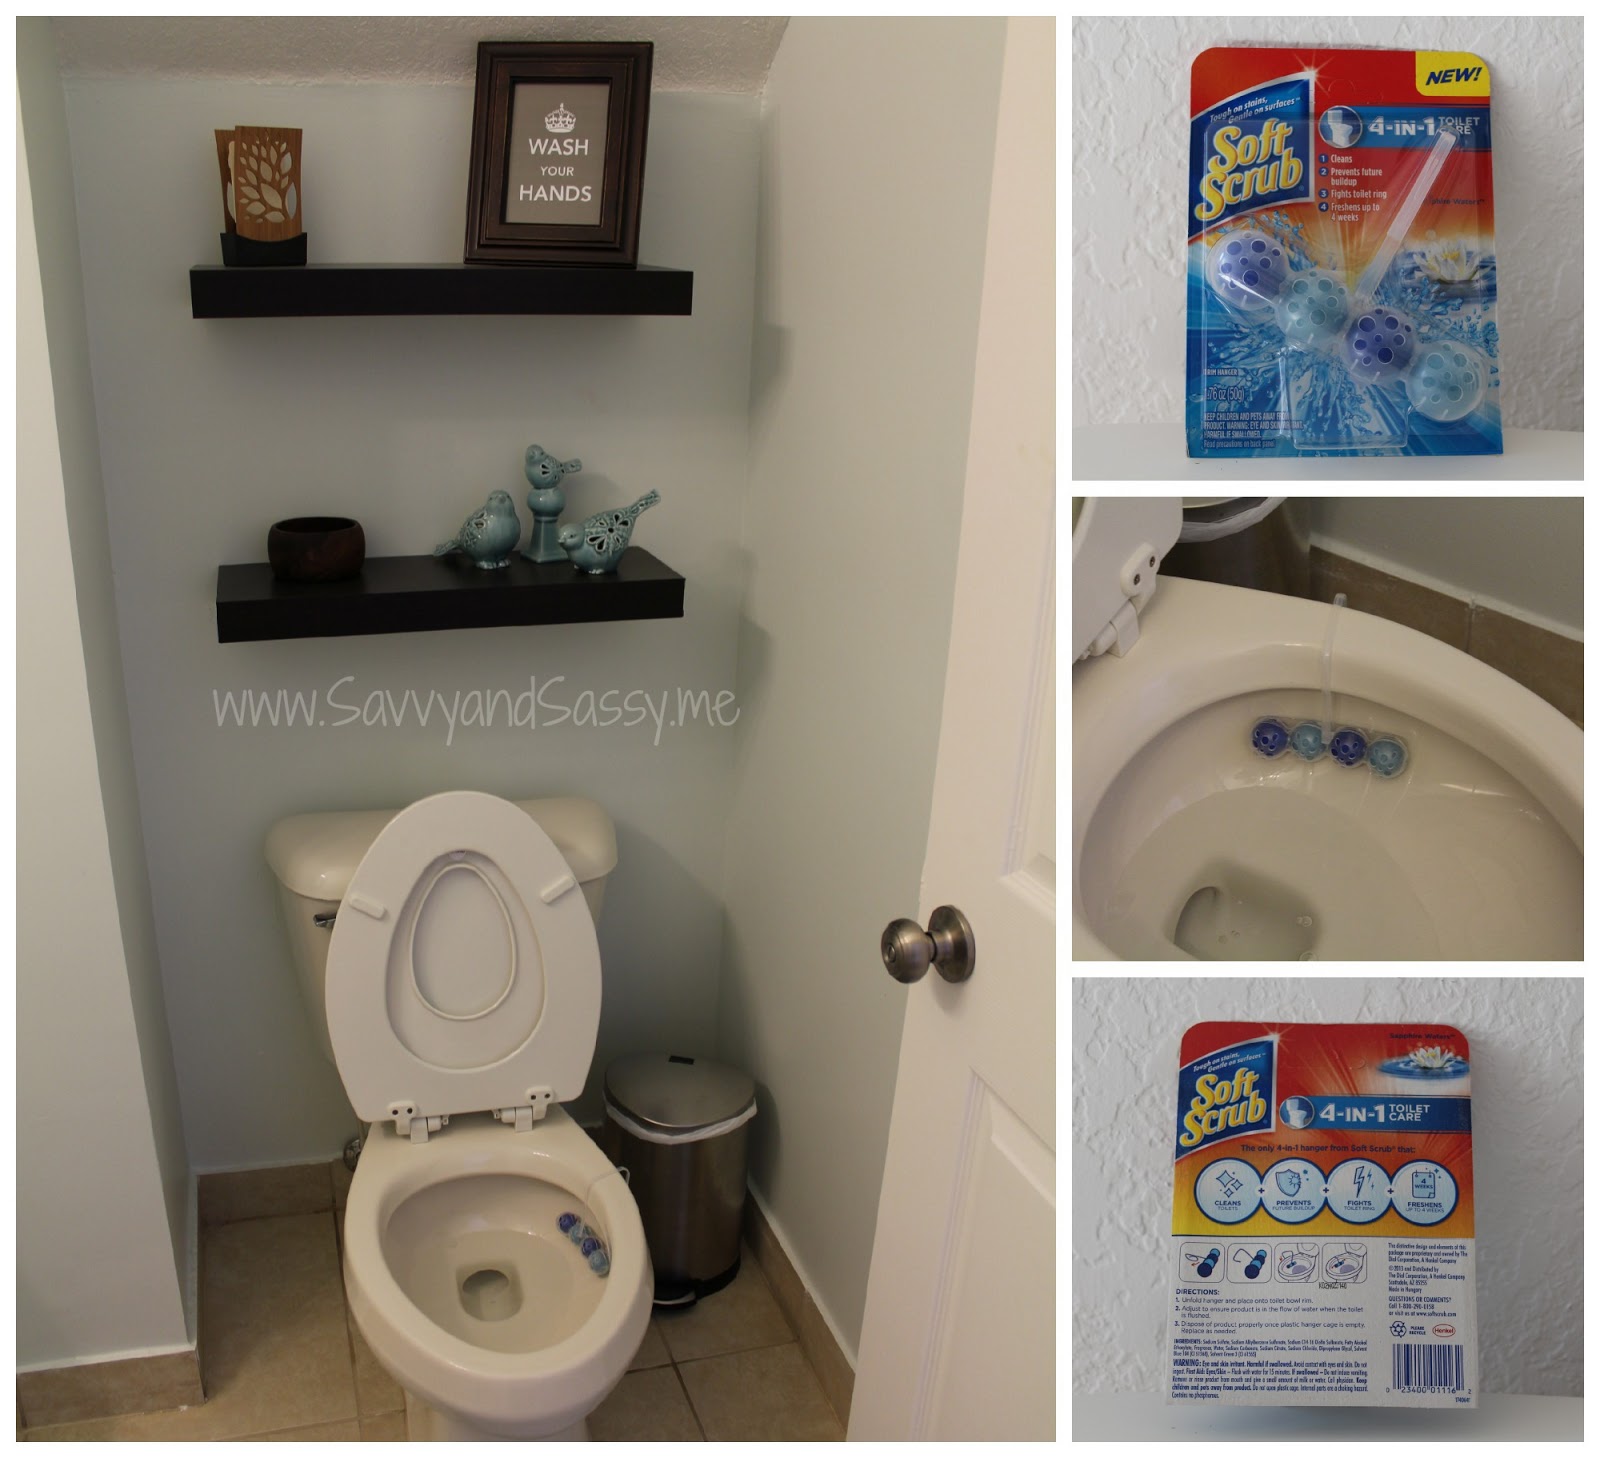 Savvy And Sassy Soft Scrub 4 In 1 Toilet Care Review Giveaway